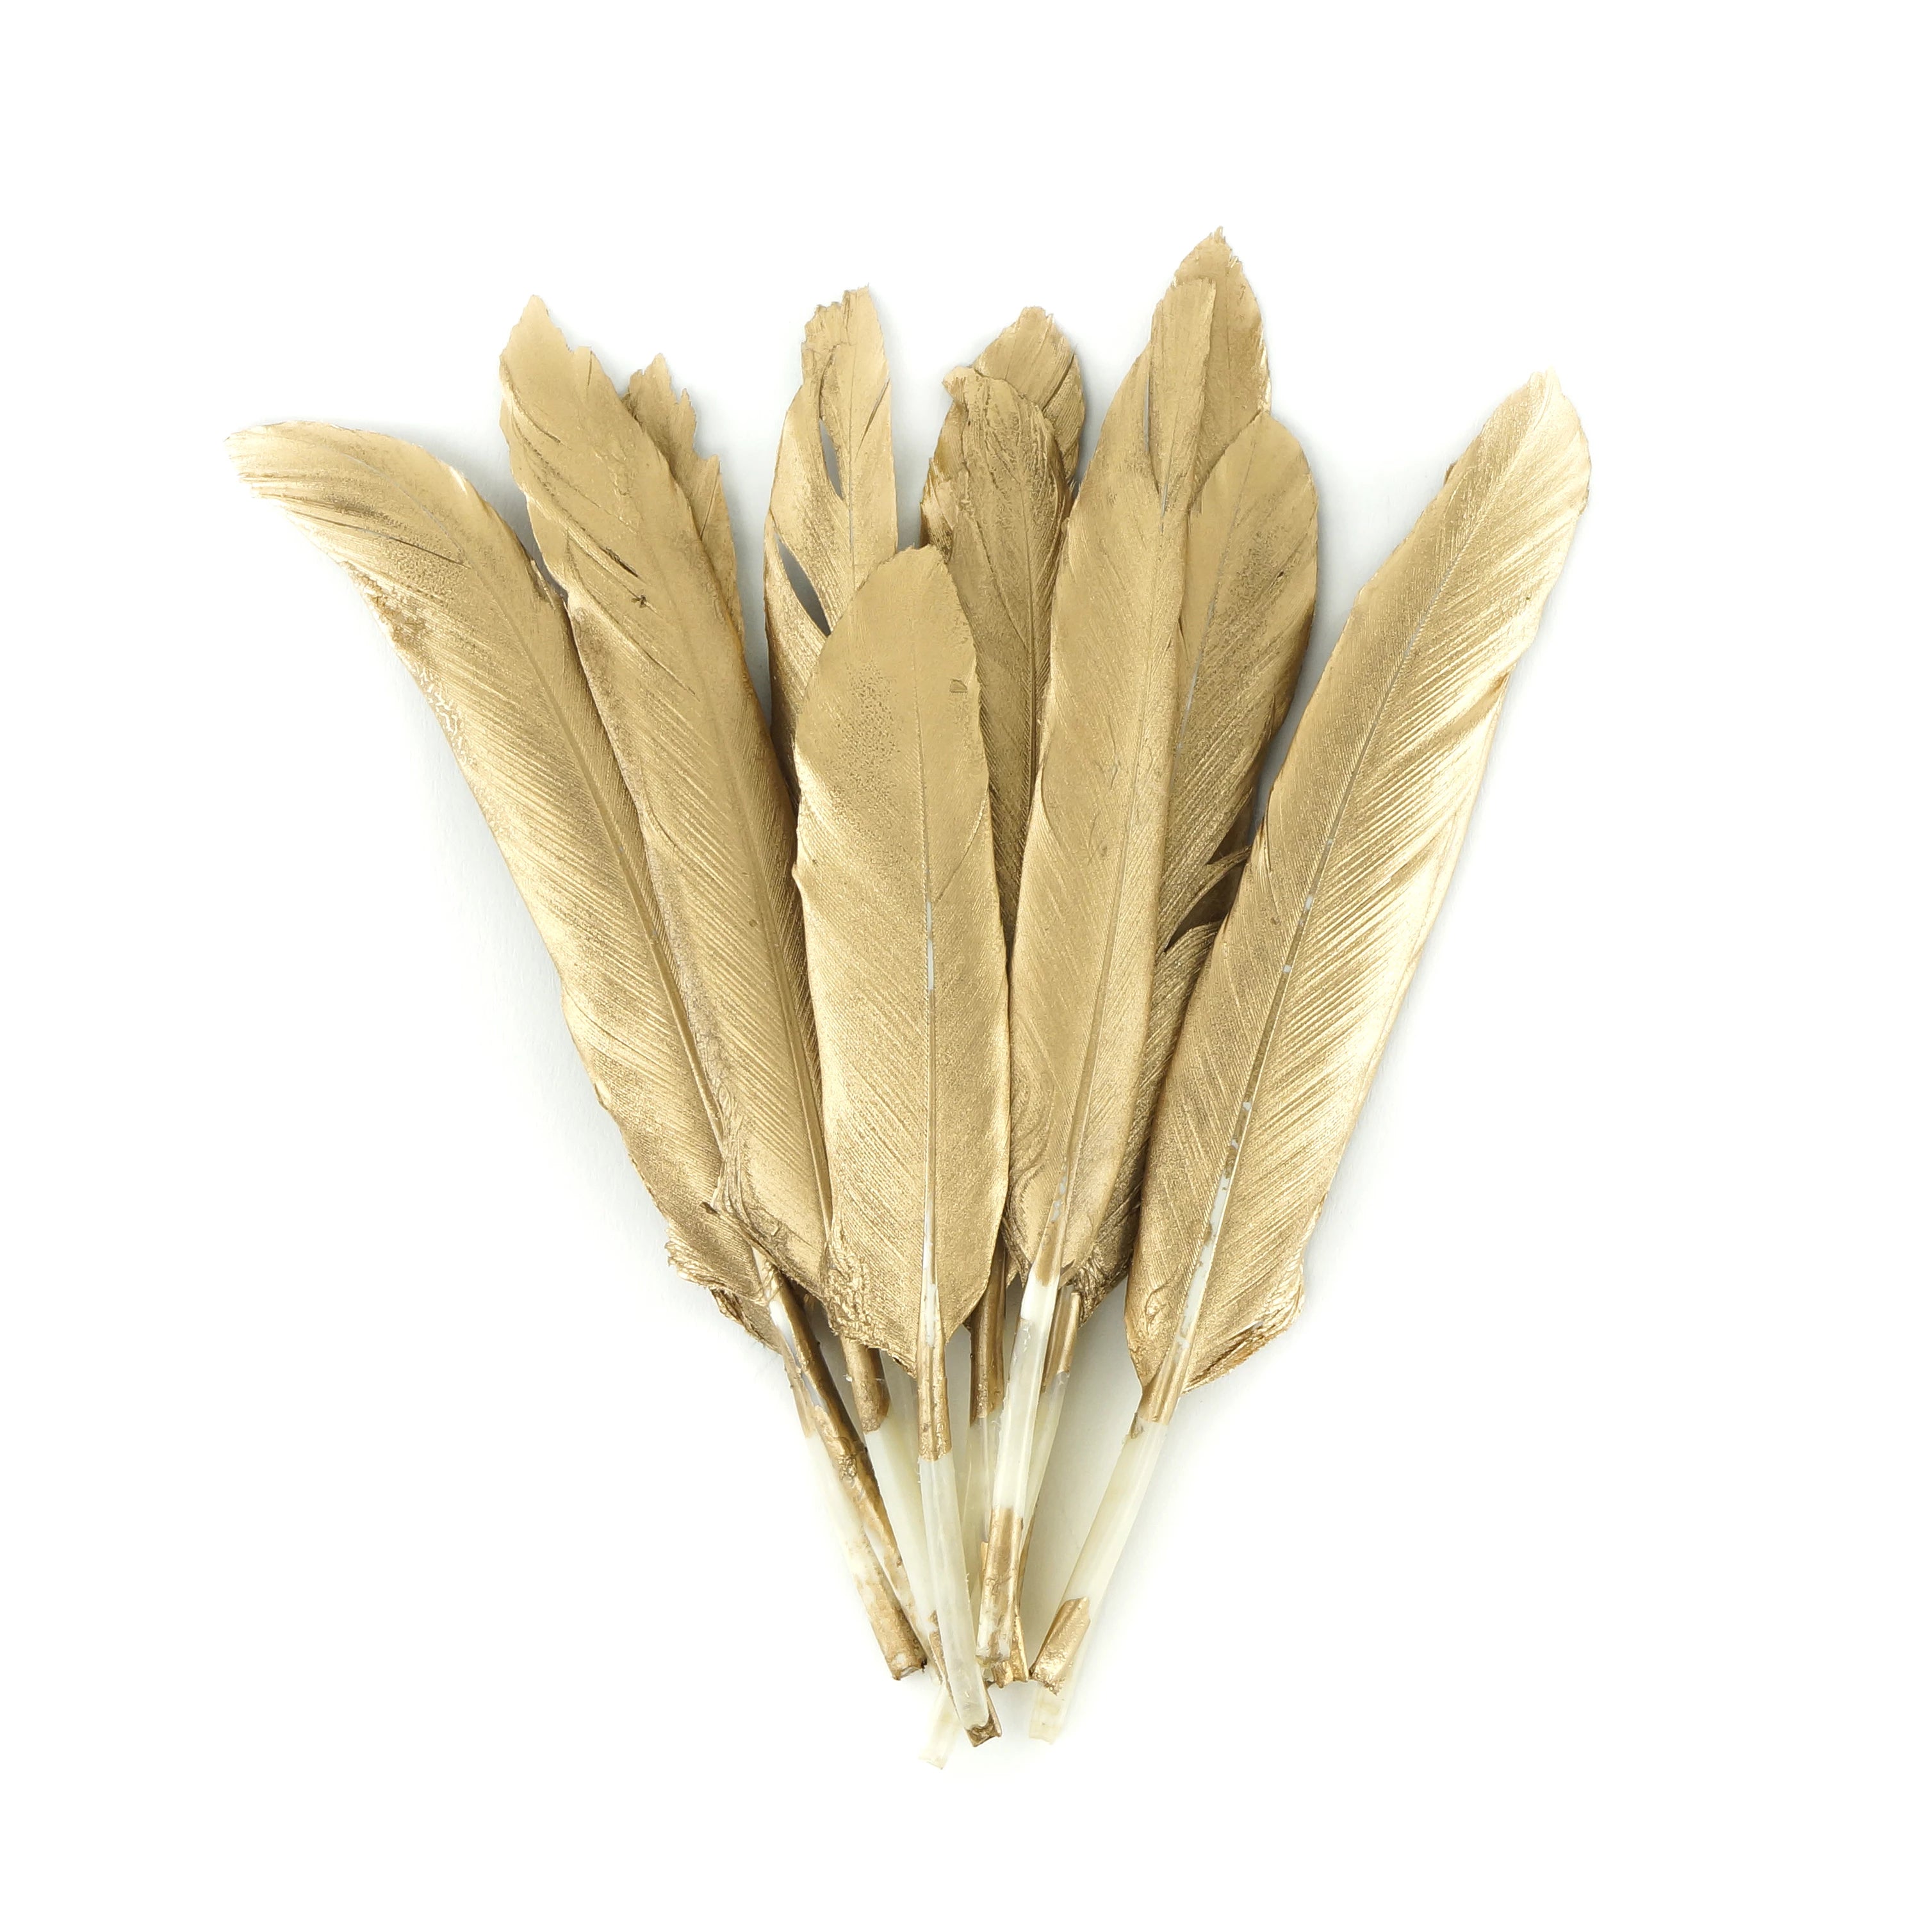 Silver Pheasant Tail Feathers - Natural - 8 - 12